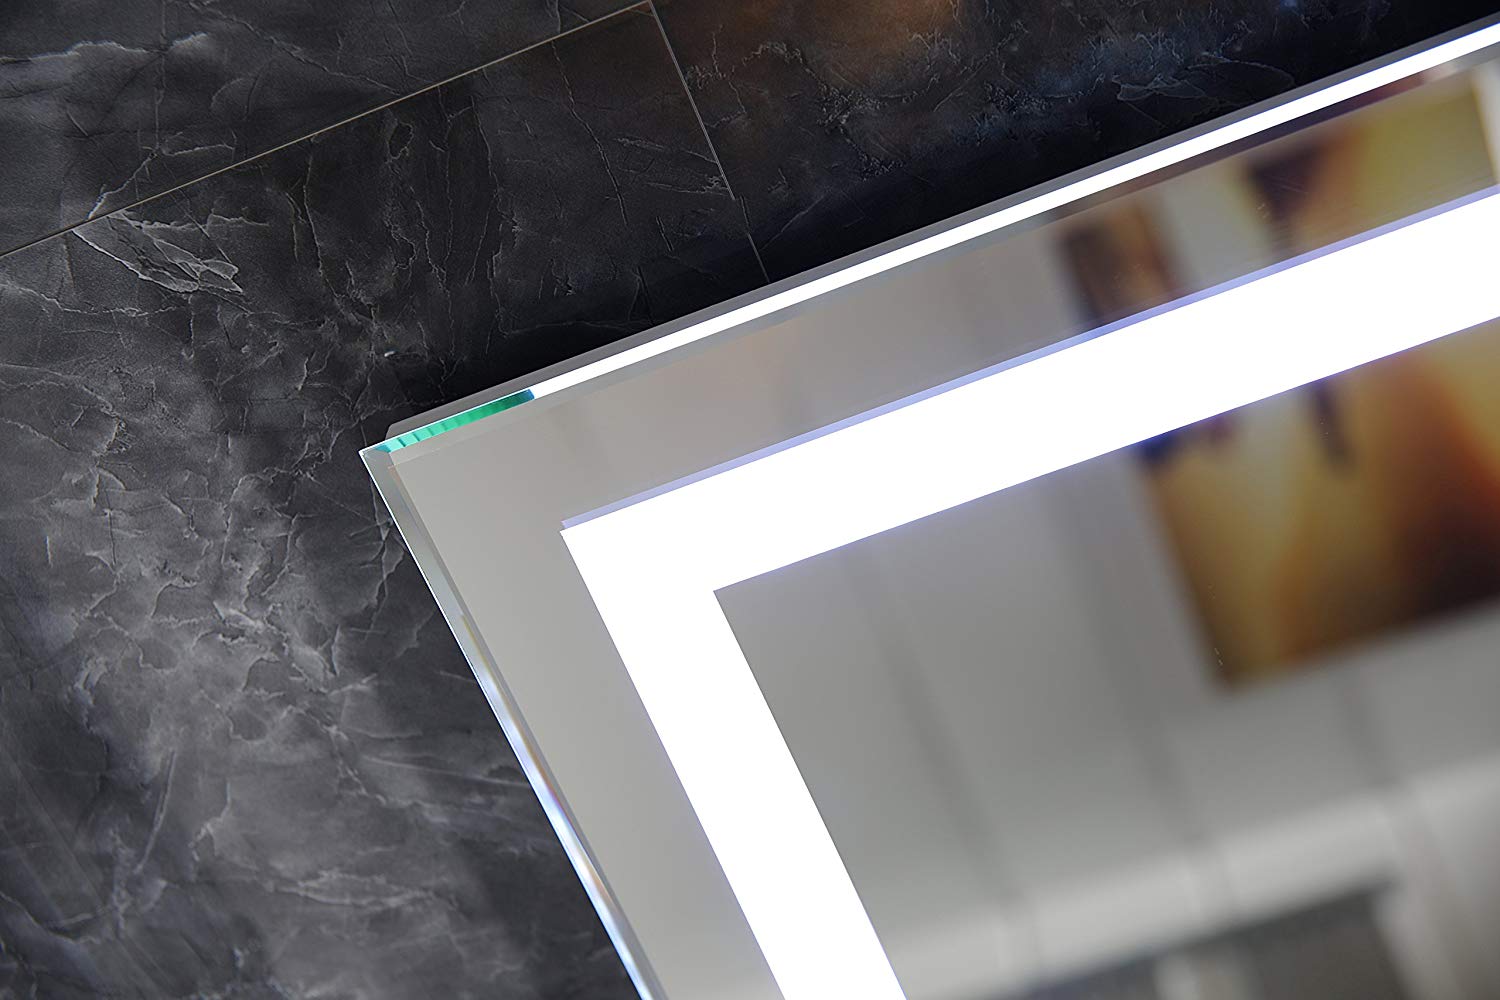 ENE LED lighted mirrors feature